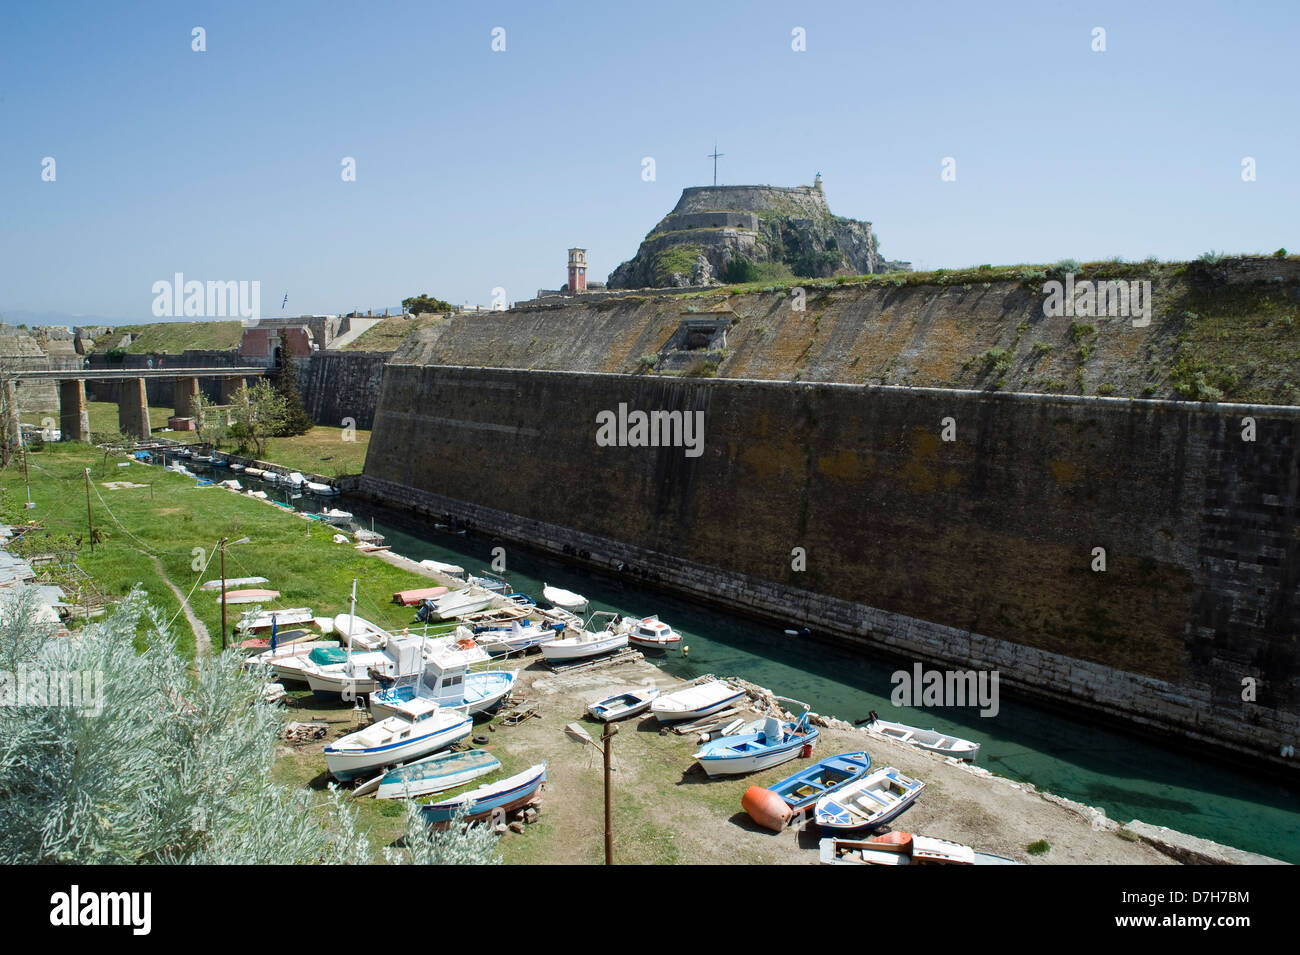 Greece, Corfu (or 'Kerkyra') island. The canal called 'Contrafossa', that separates the Old Fort from the old town. Greece Stock Photo